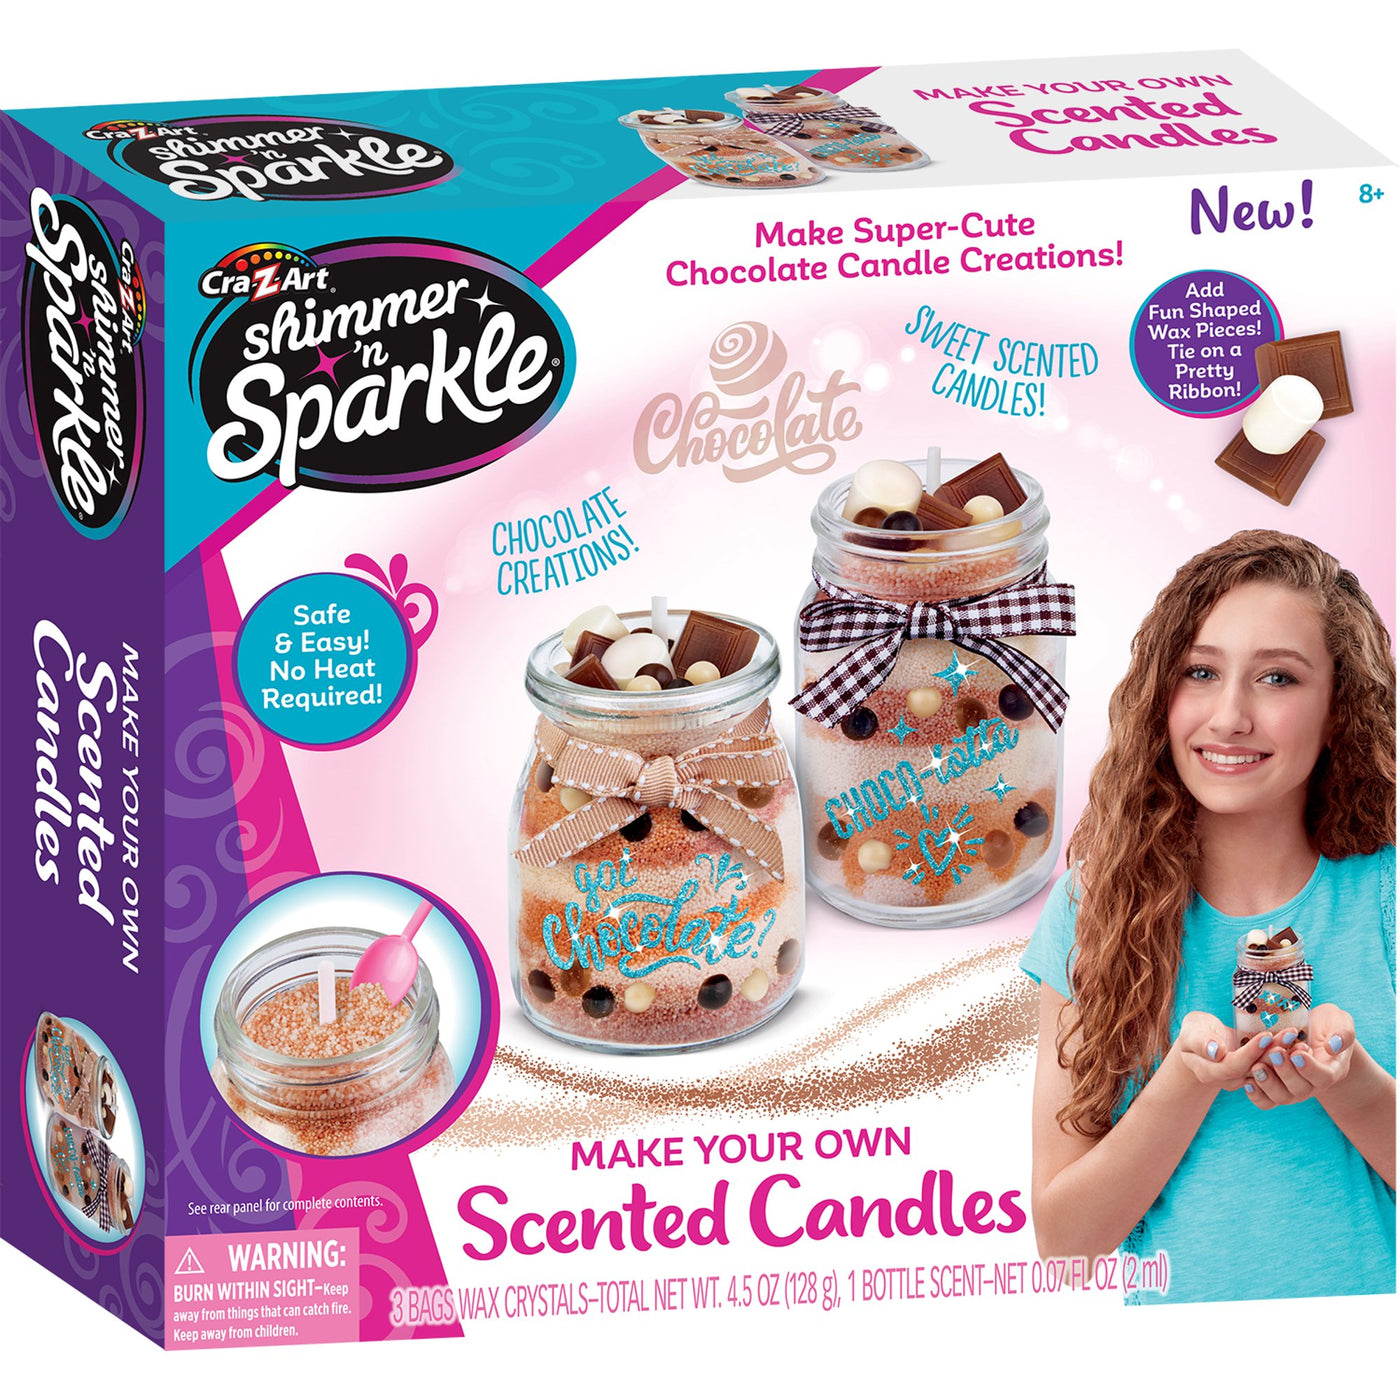 Make Your Own Scented Candles - Chocolate